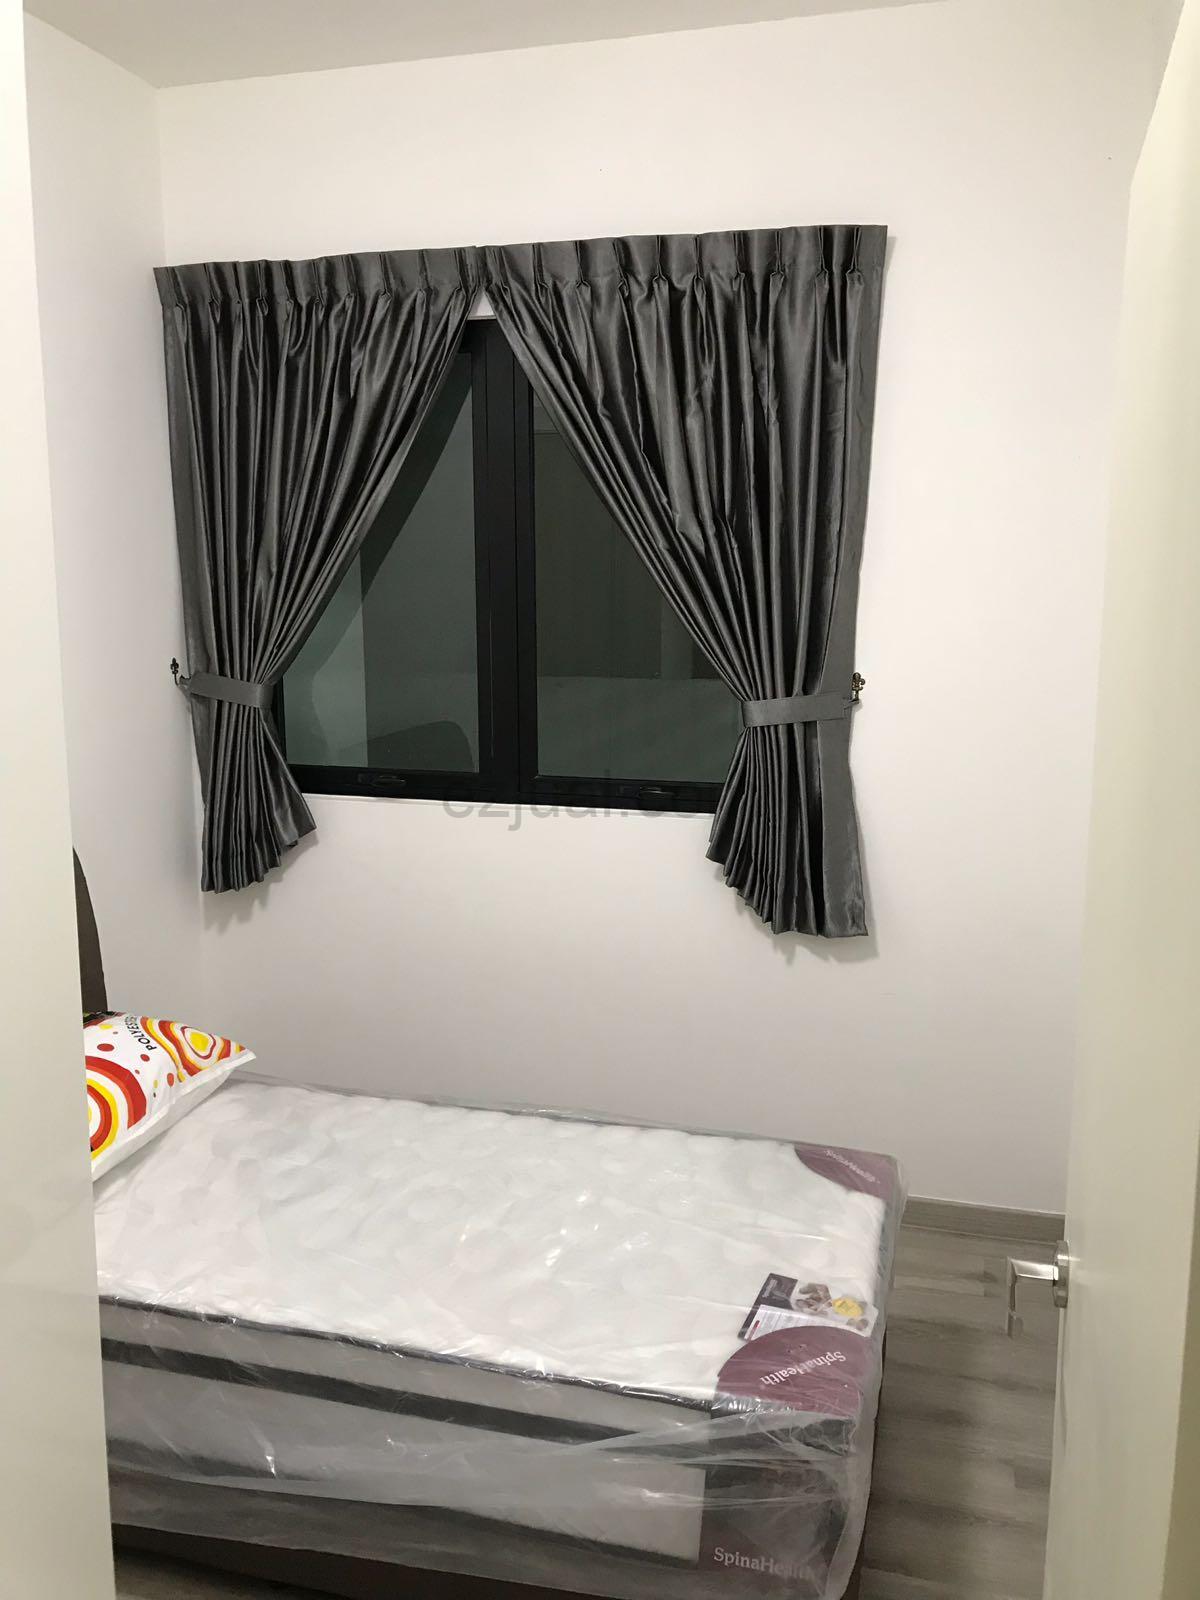 Southkey Mosaic 2+1room Full Furnish For Rent (Middle Floor)